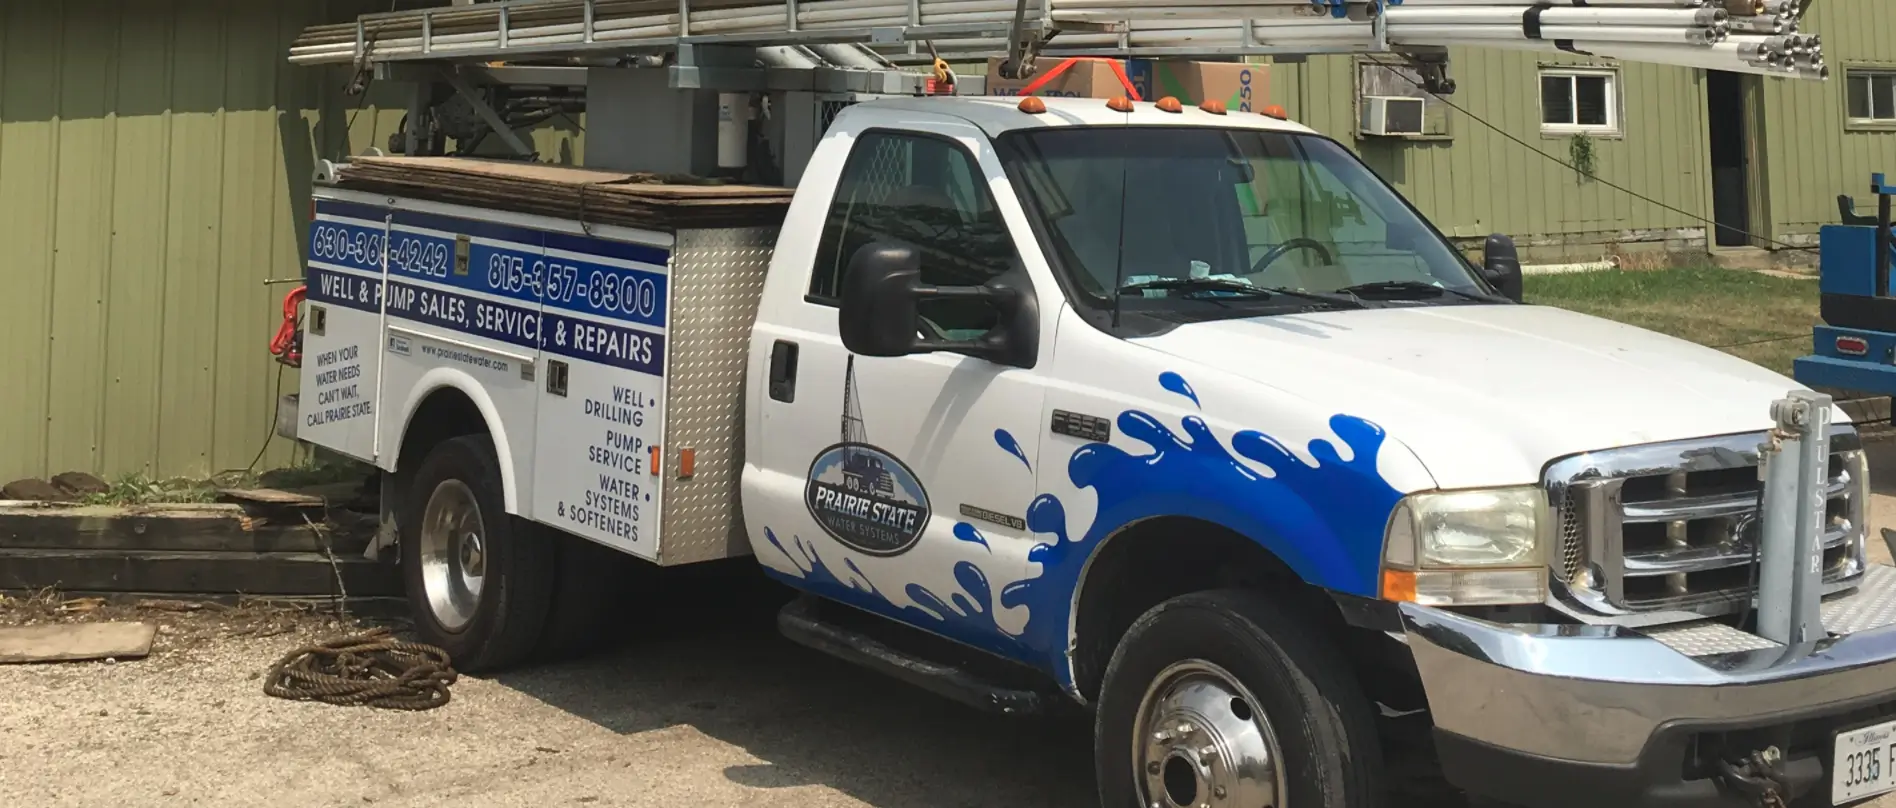 A Prairie State Water Systems service truck parked in front a building for on-site water pump maintenance